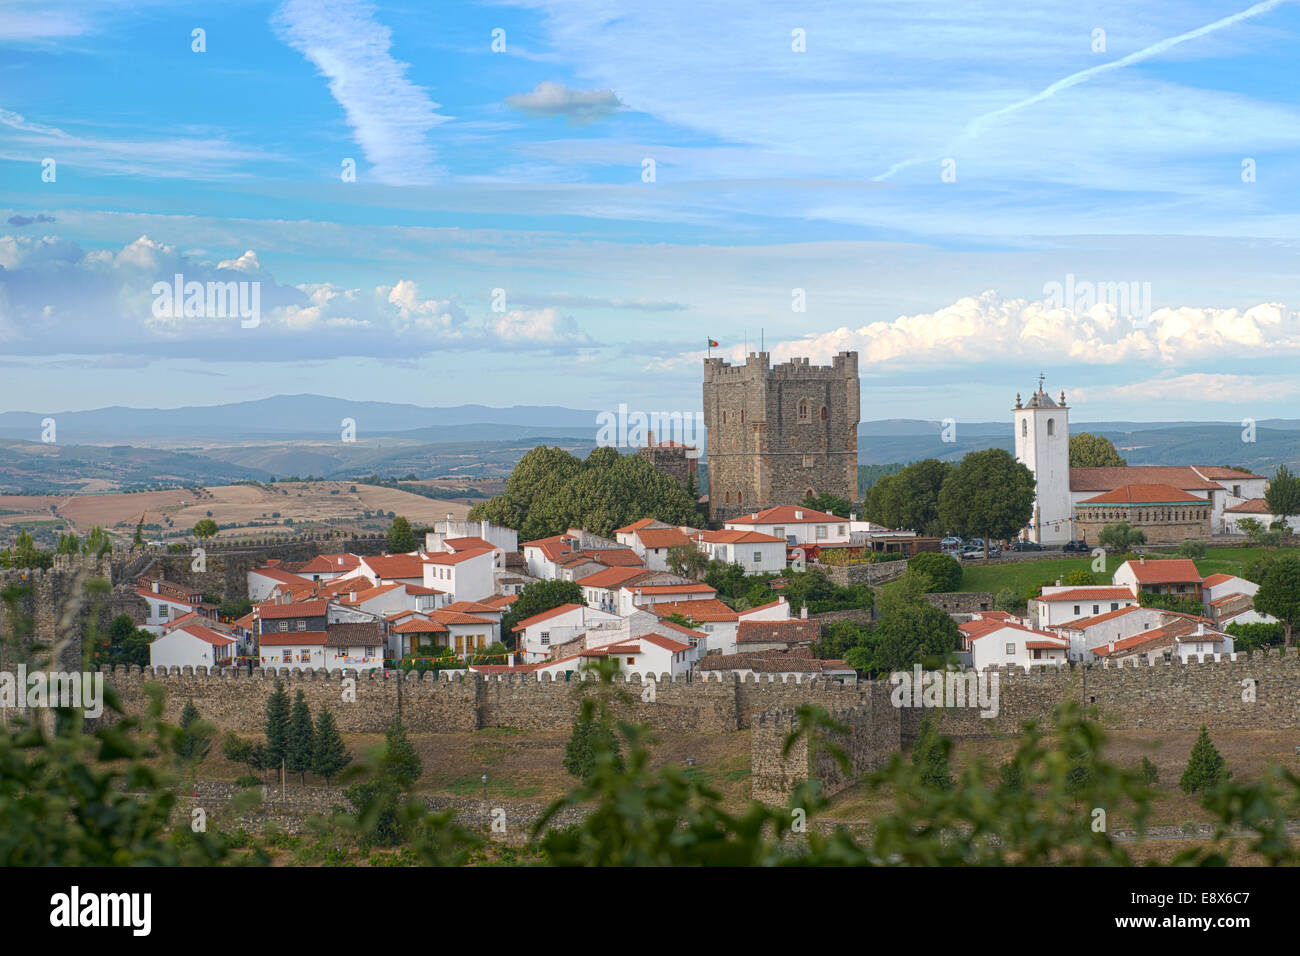 View of the Braganca Castle in Tras-os-Montes, north of Portugal Stock Photo